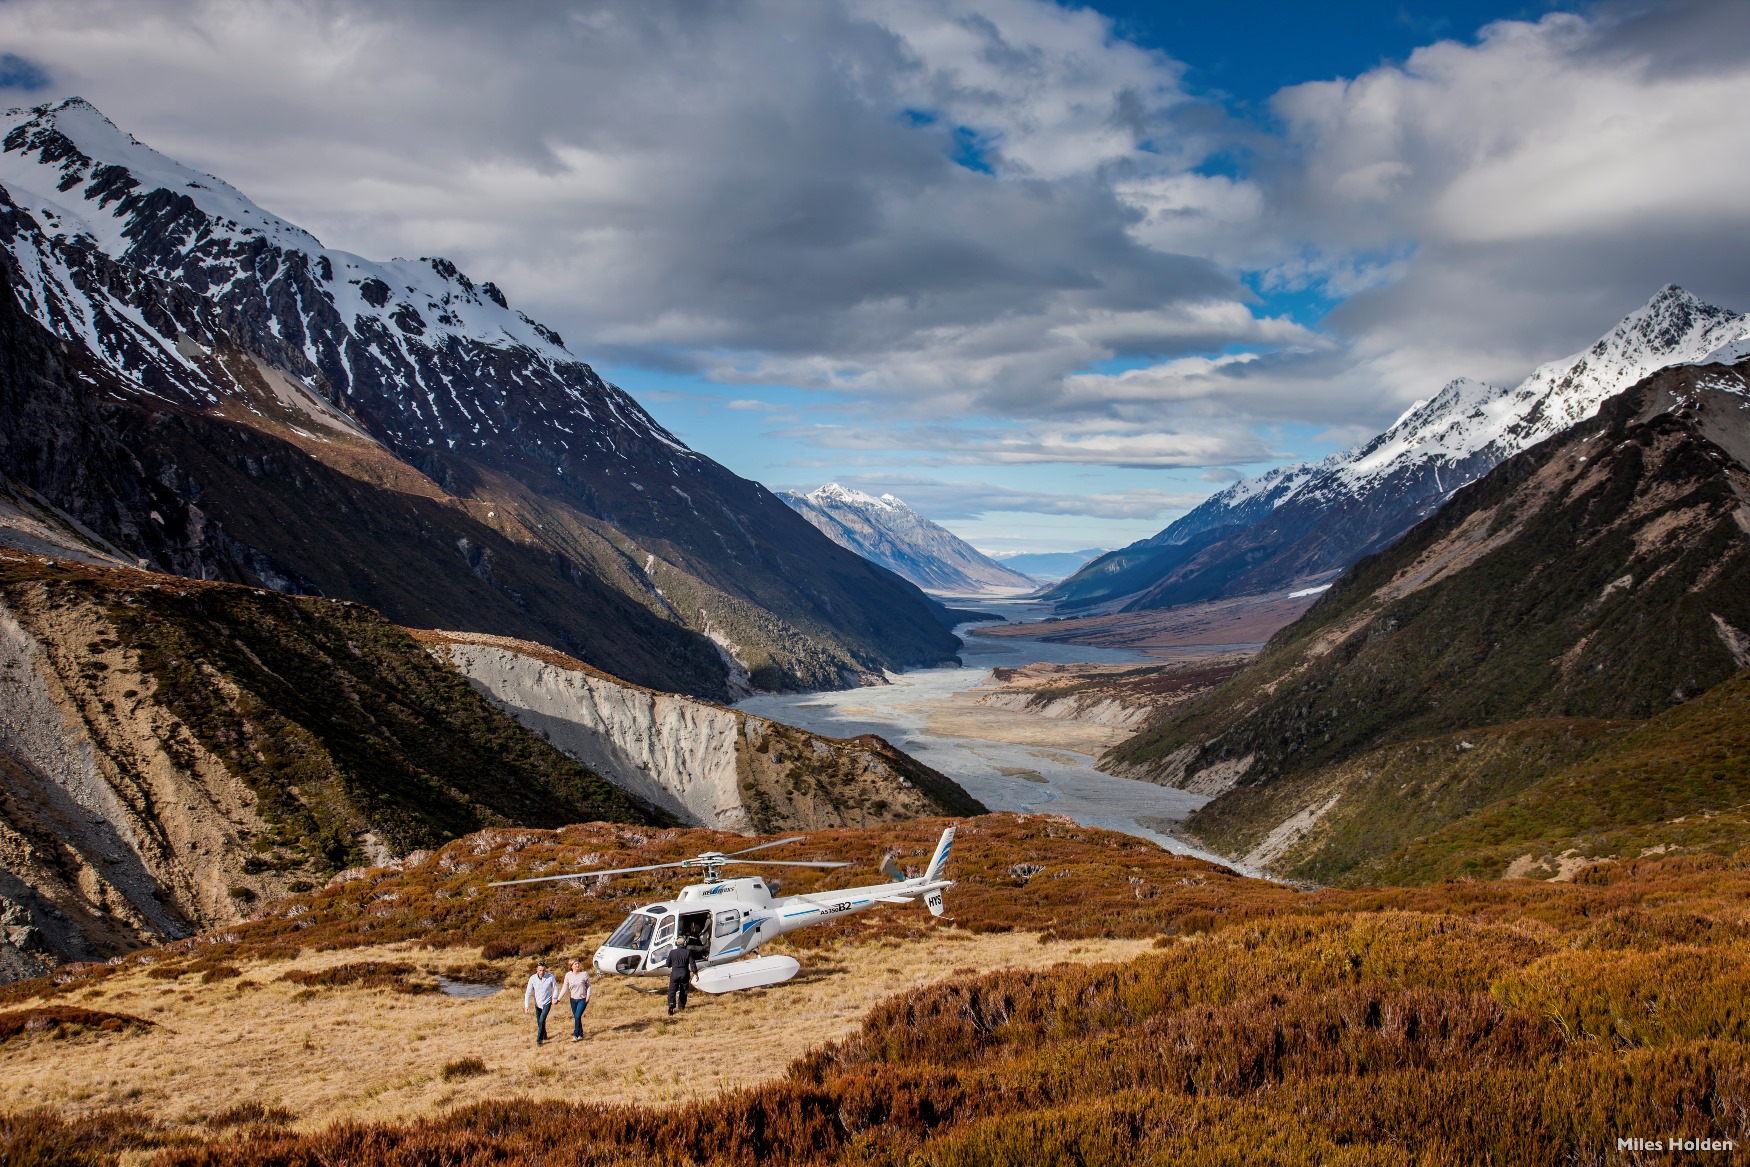 A helicopter in the Southern Alps of New Zealand - photo credit Miles Holden